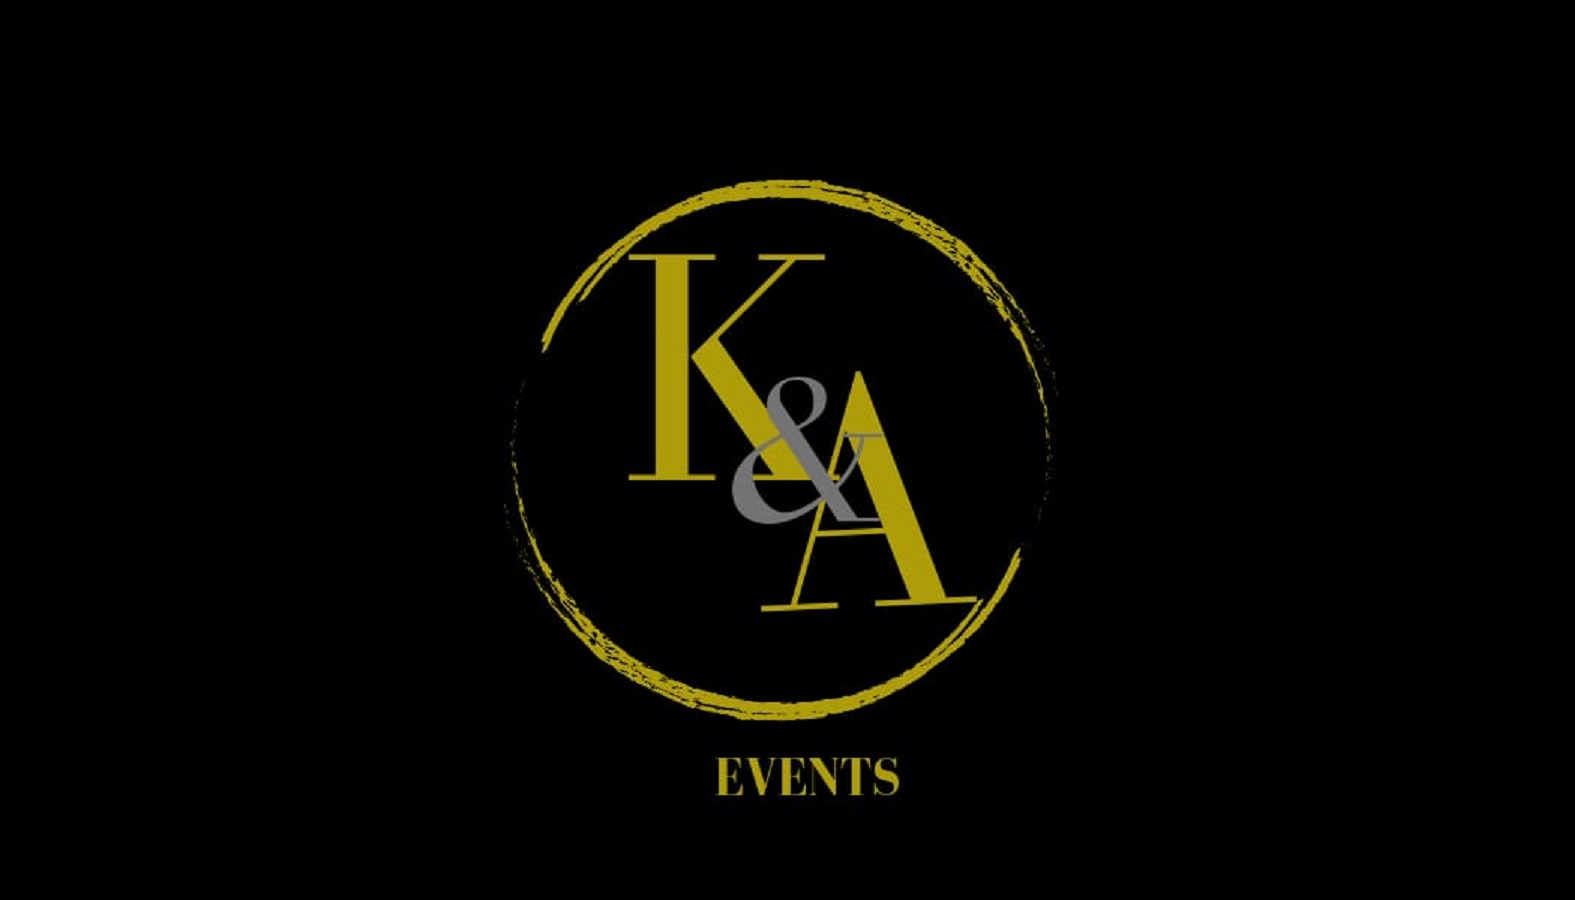 K & A EVENTS